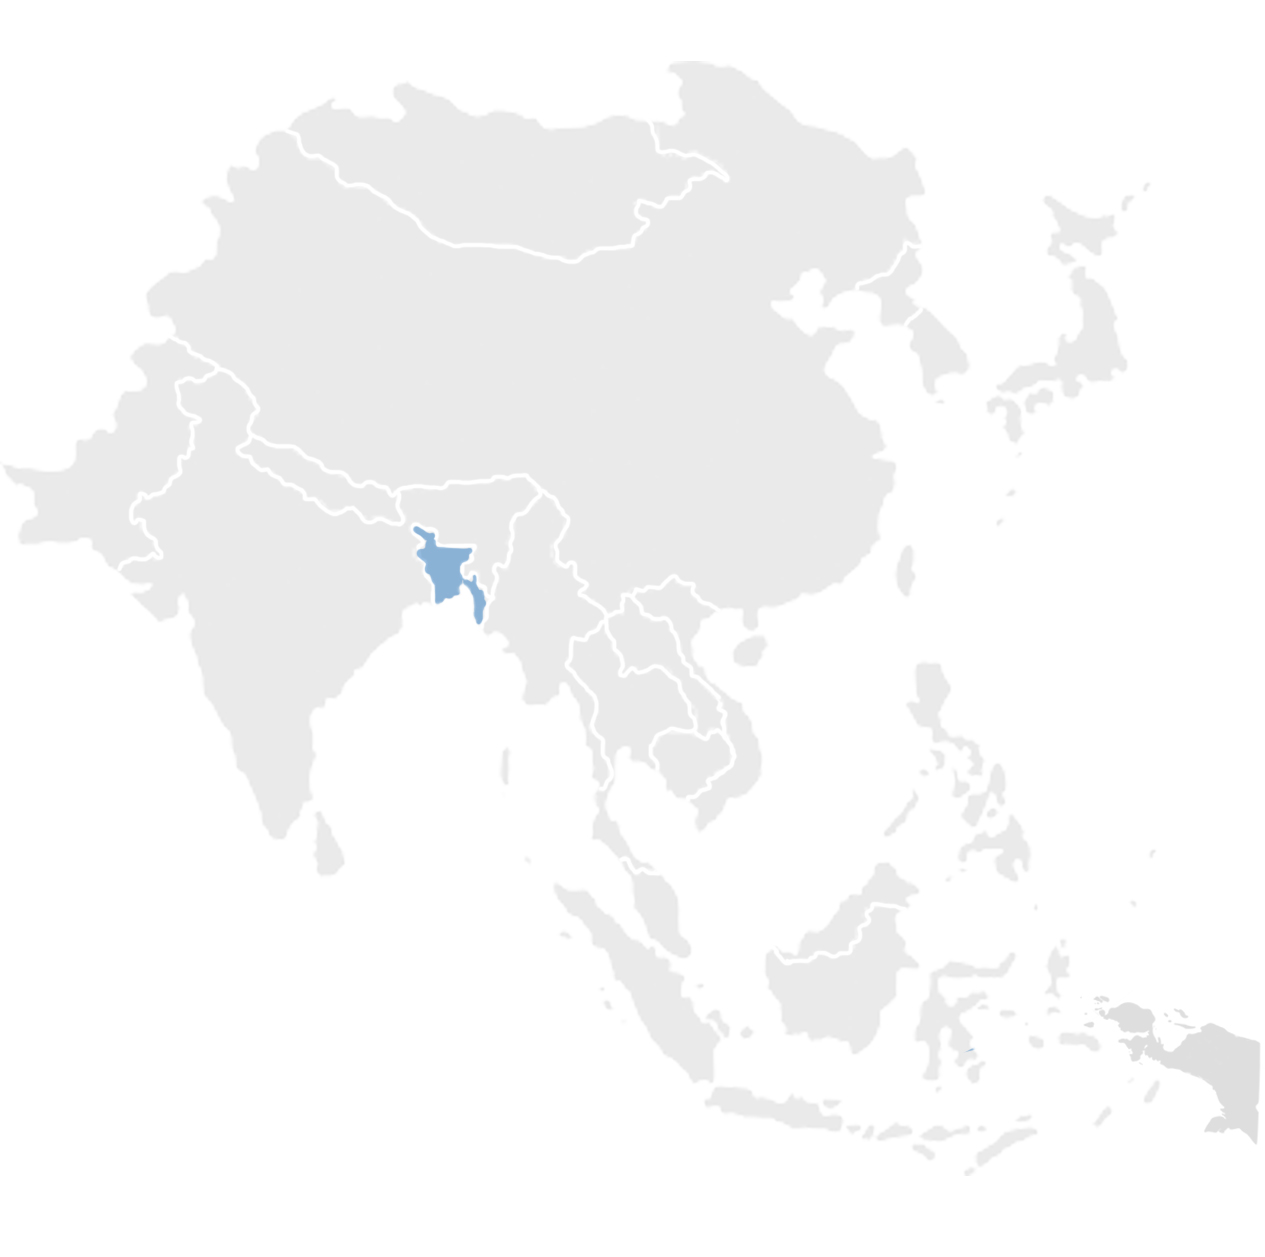 Gray map of Asia with Bangladesh in blue